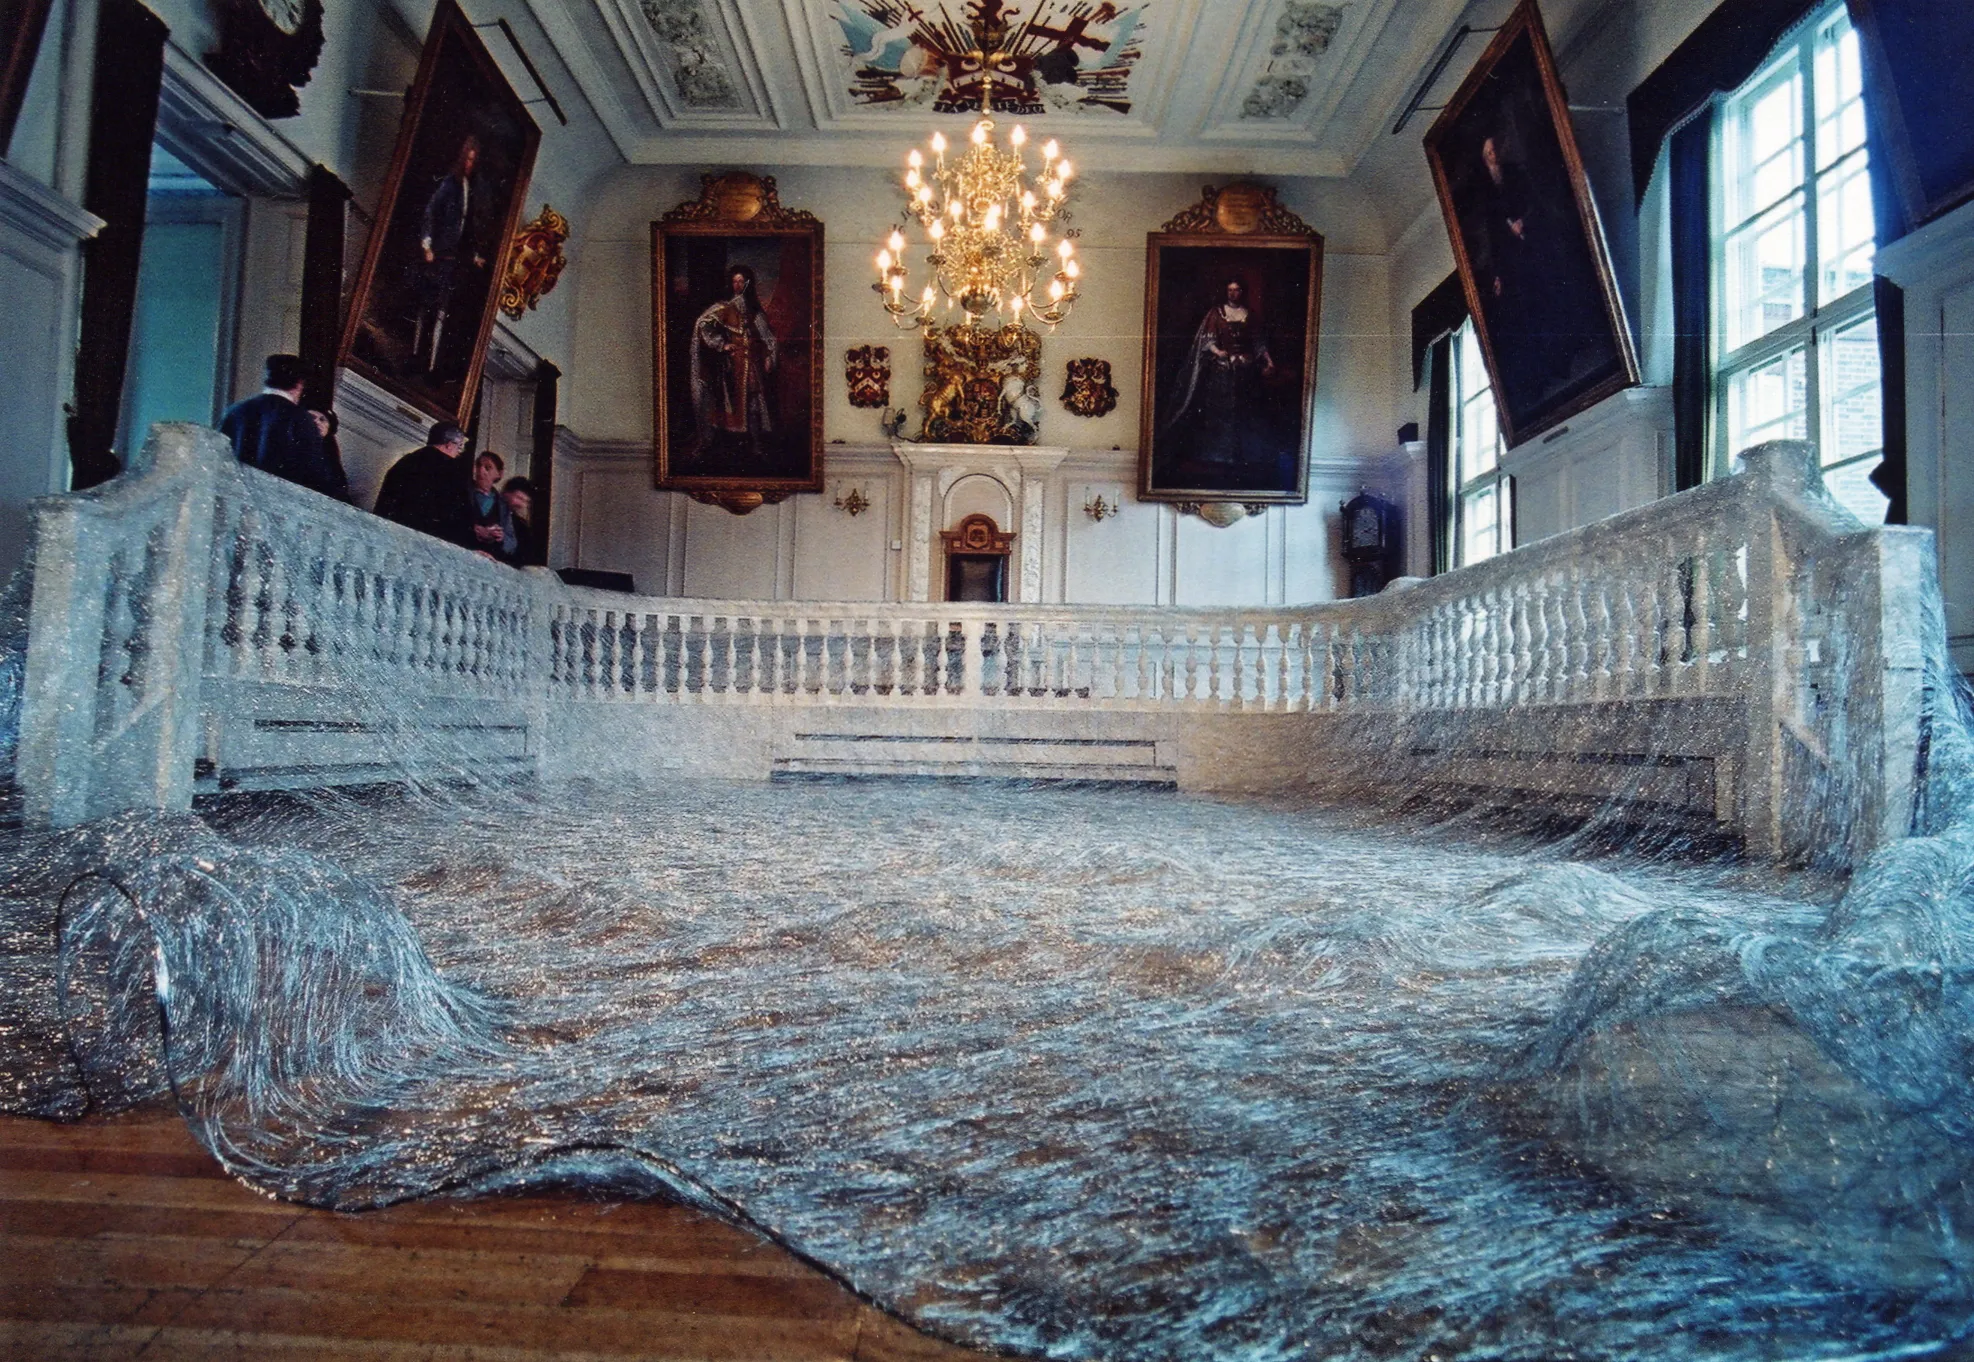 Textural space by Kyoko Kumai (exhibition by Lesley Millar)